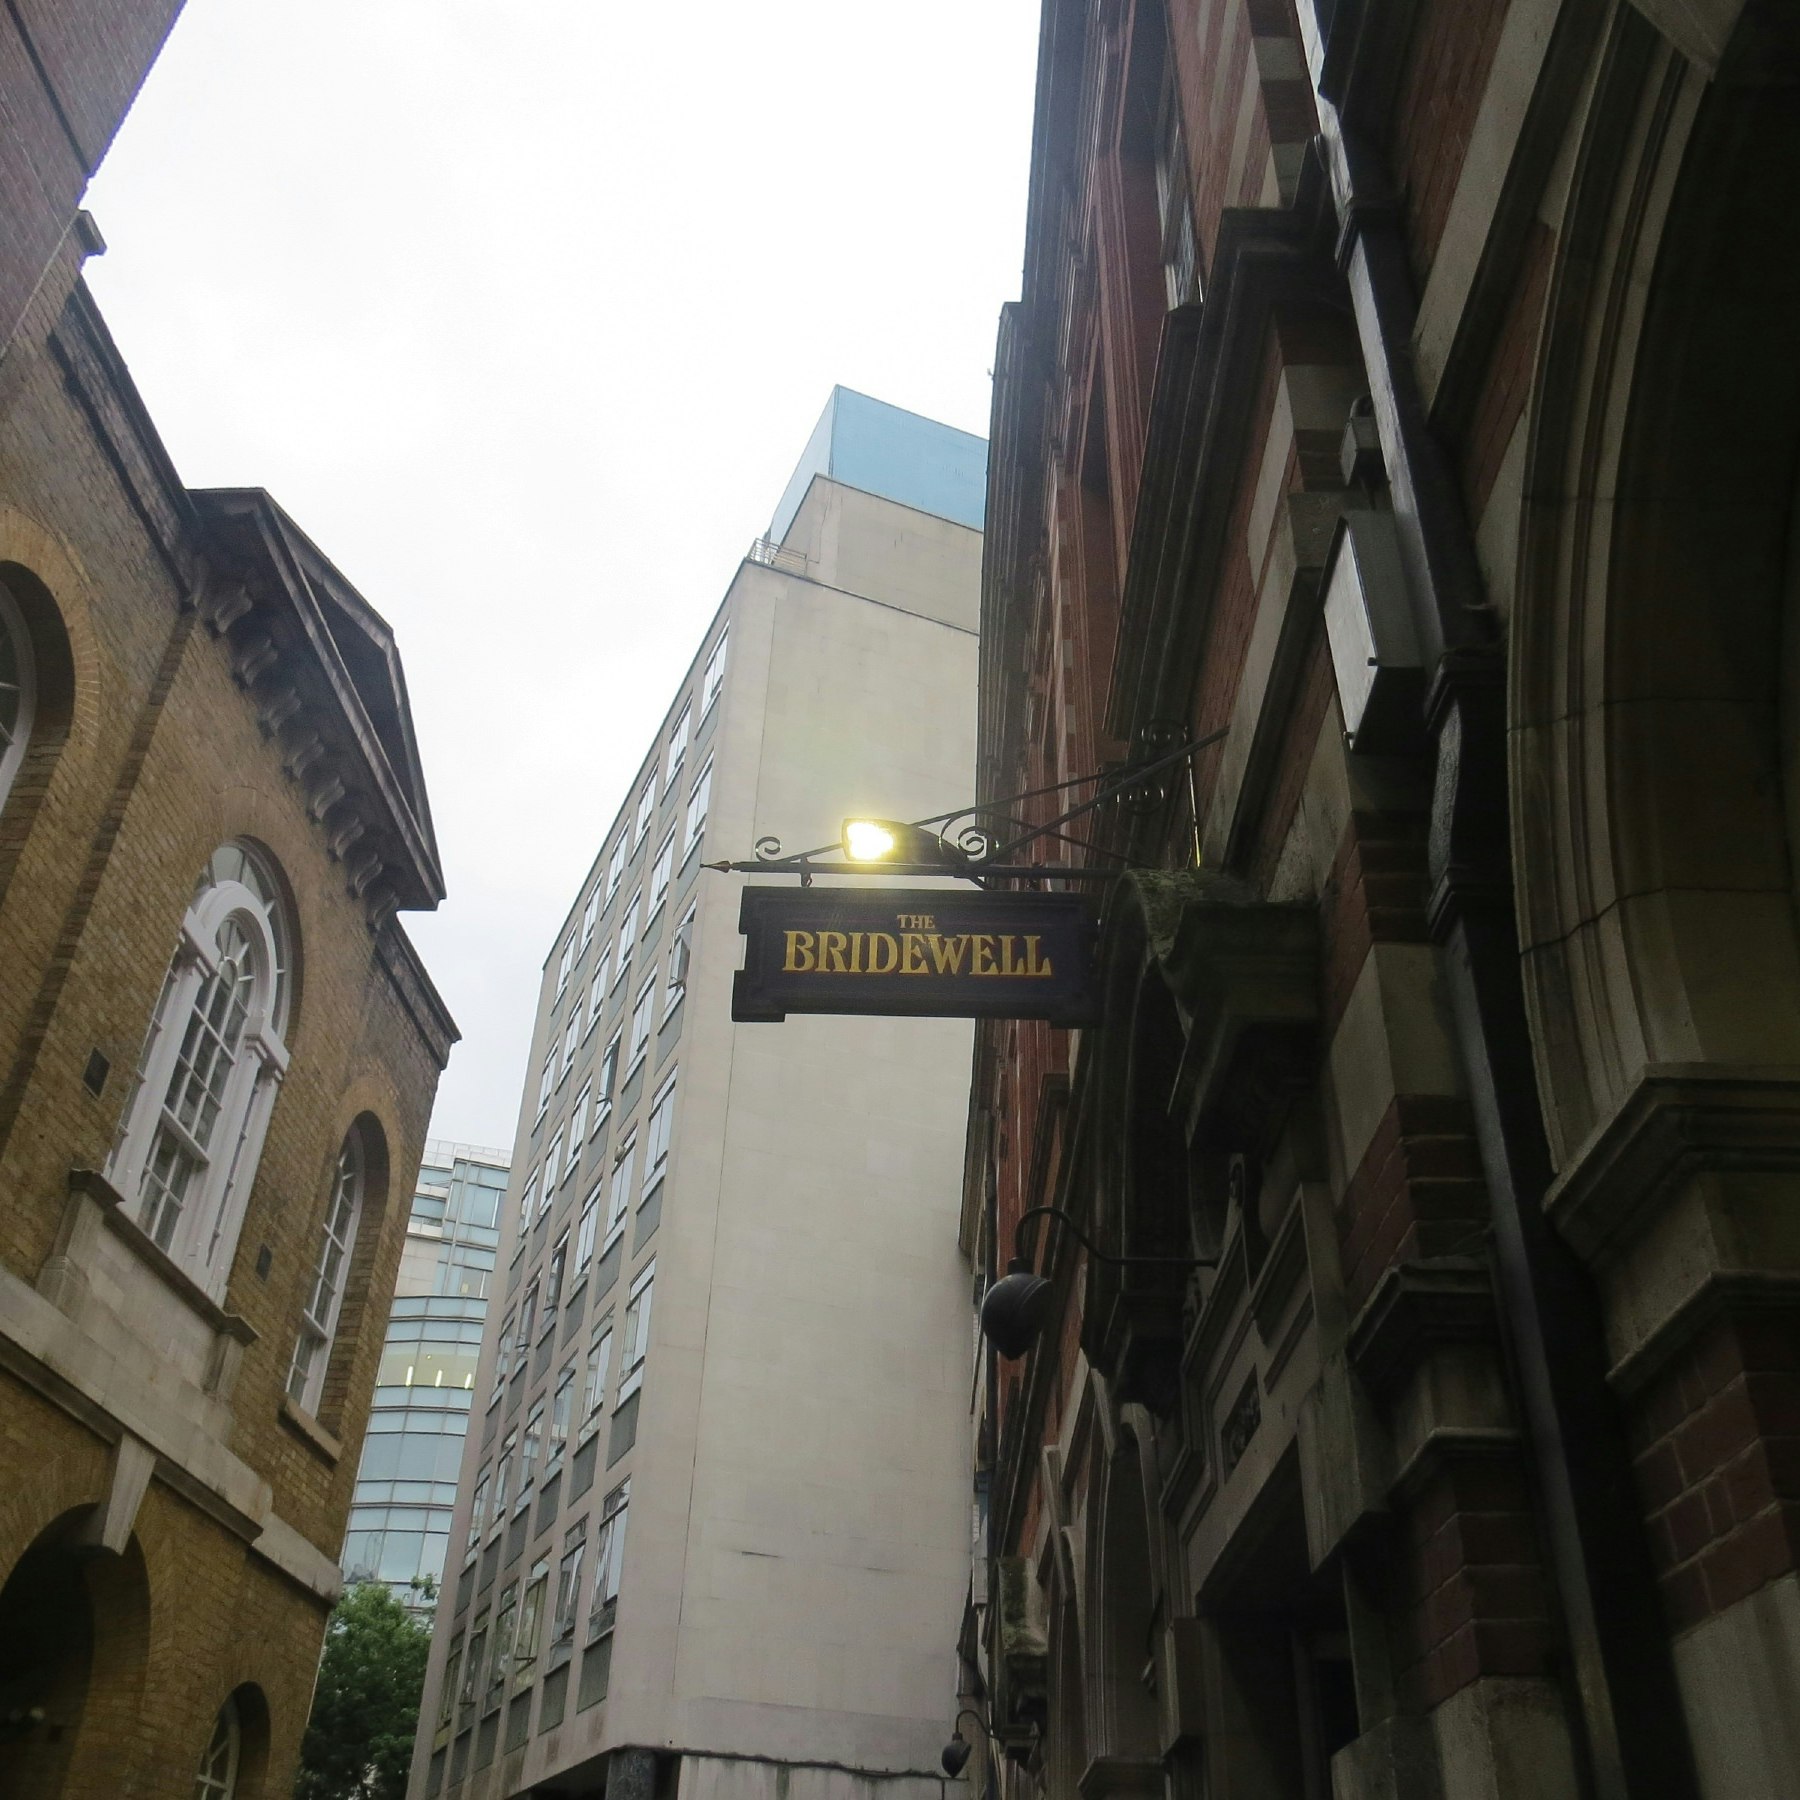 The entrance to Bridewell Theatre, which was converted from an old Victorian swimming pool